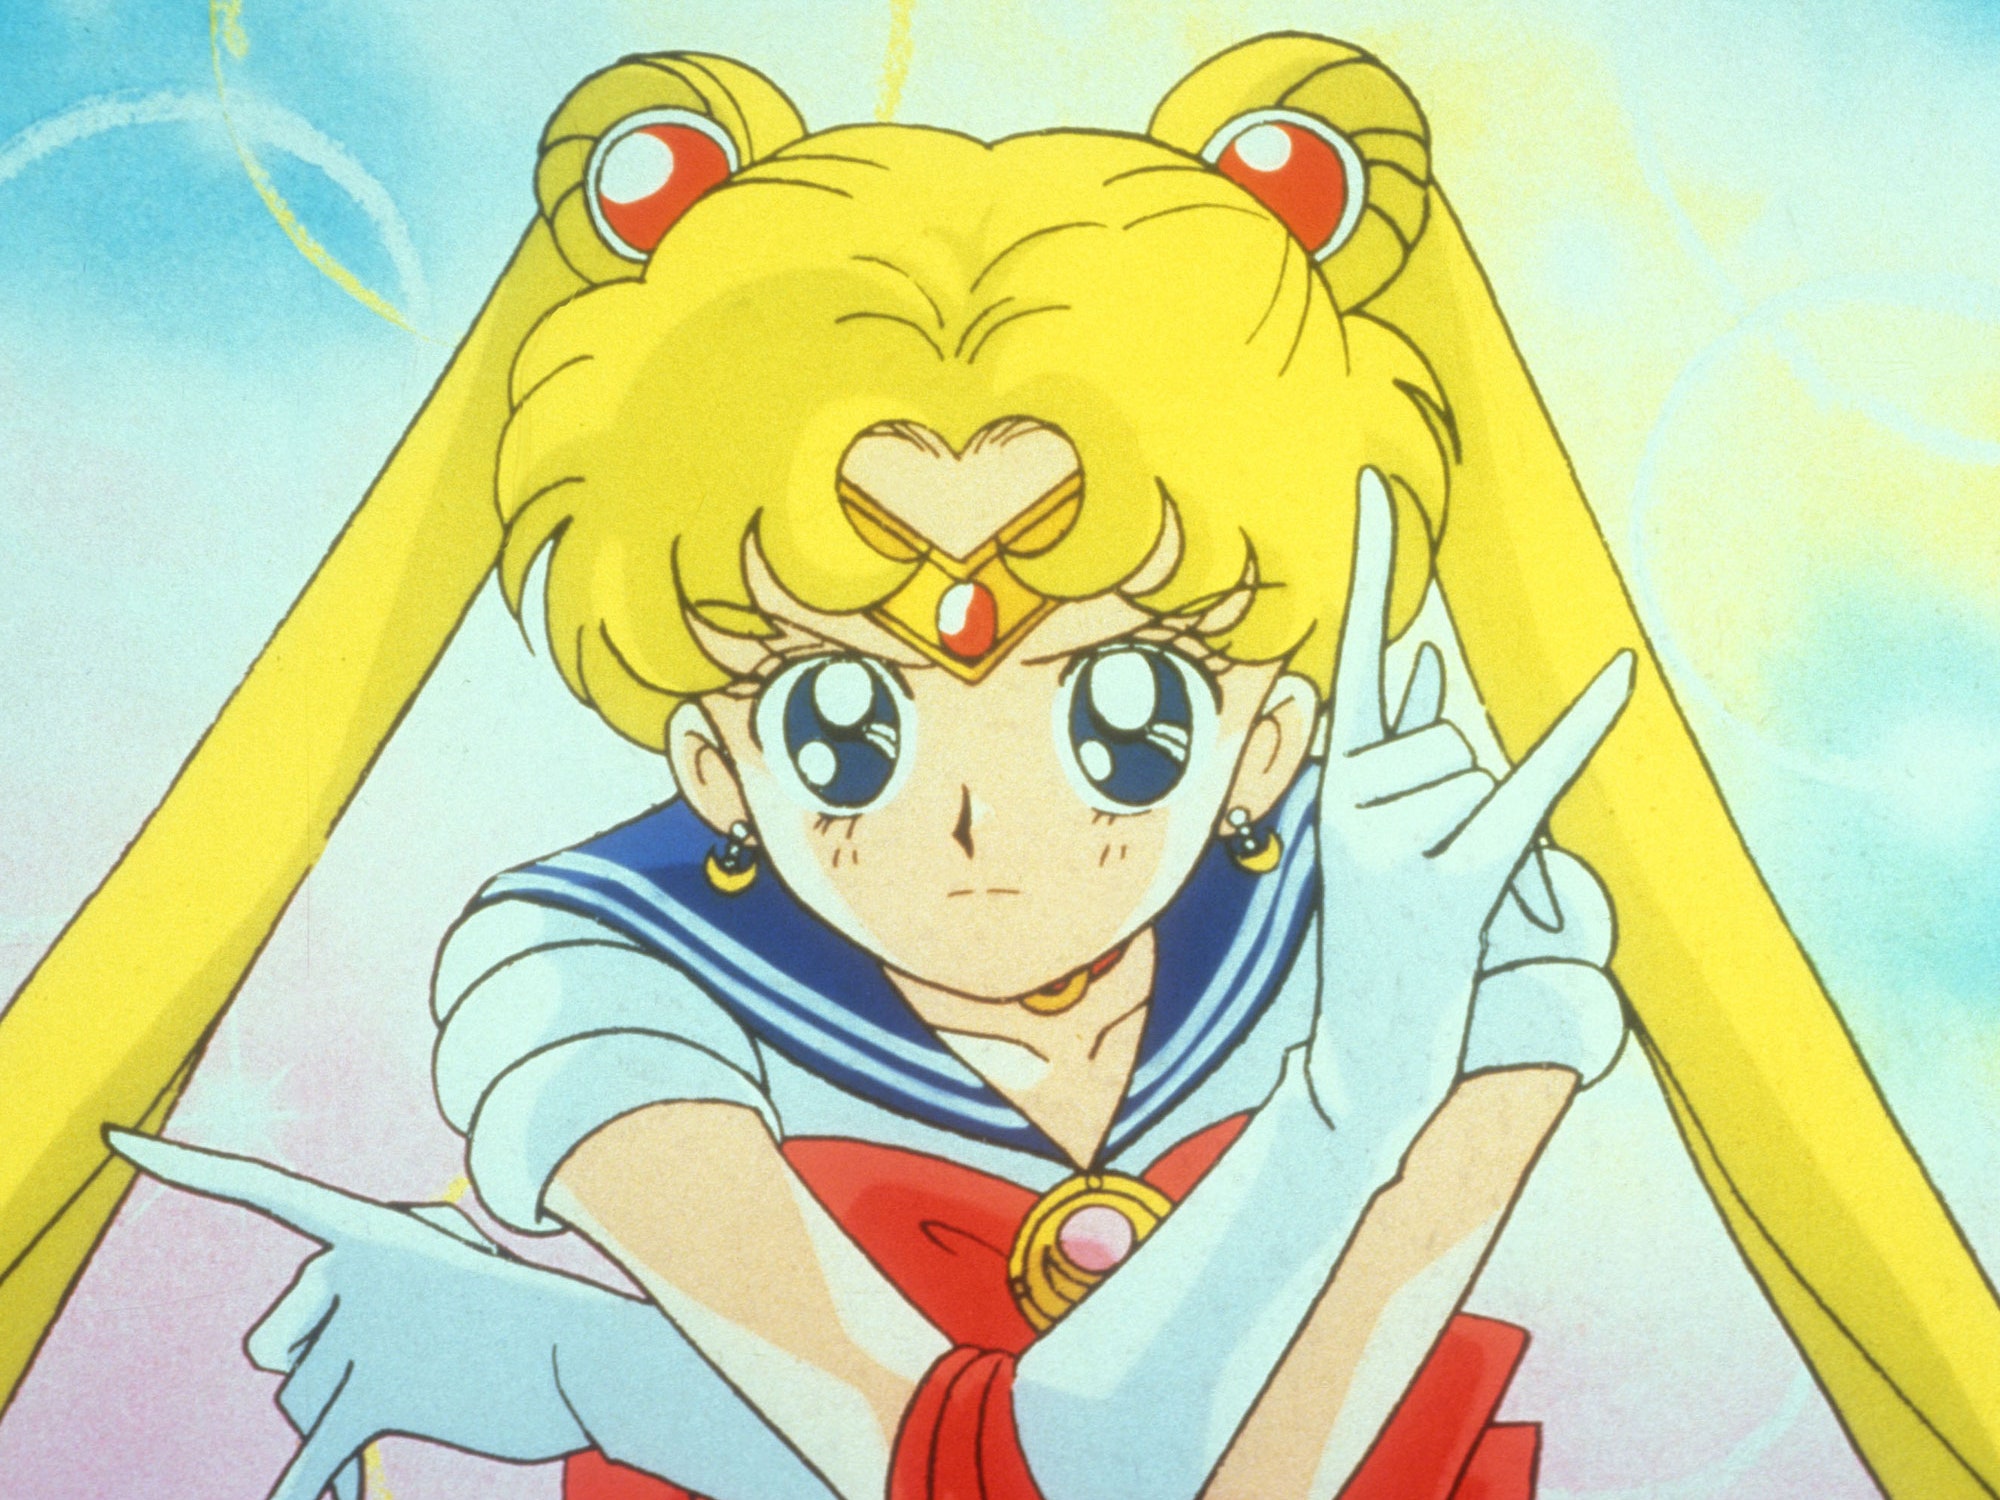 A “Sailor Moon” Clothing Line Is Coming to Uniqlo